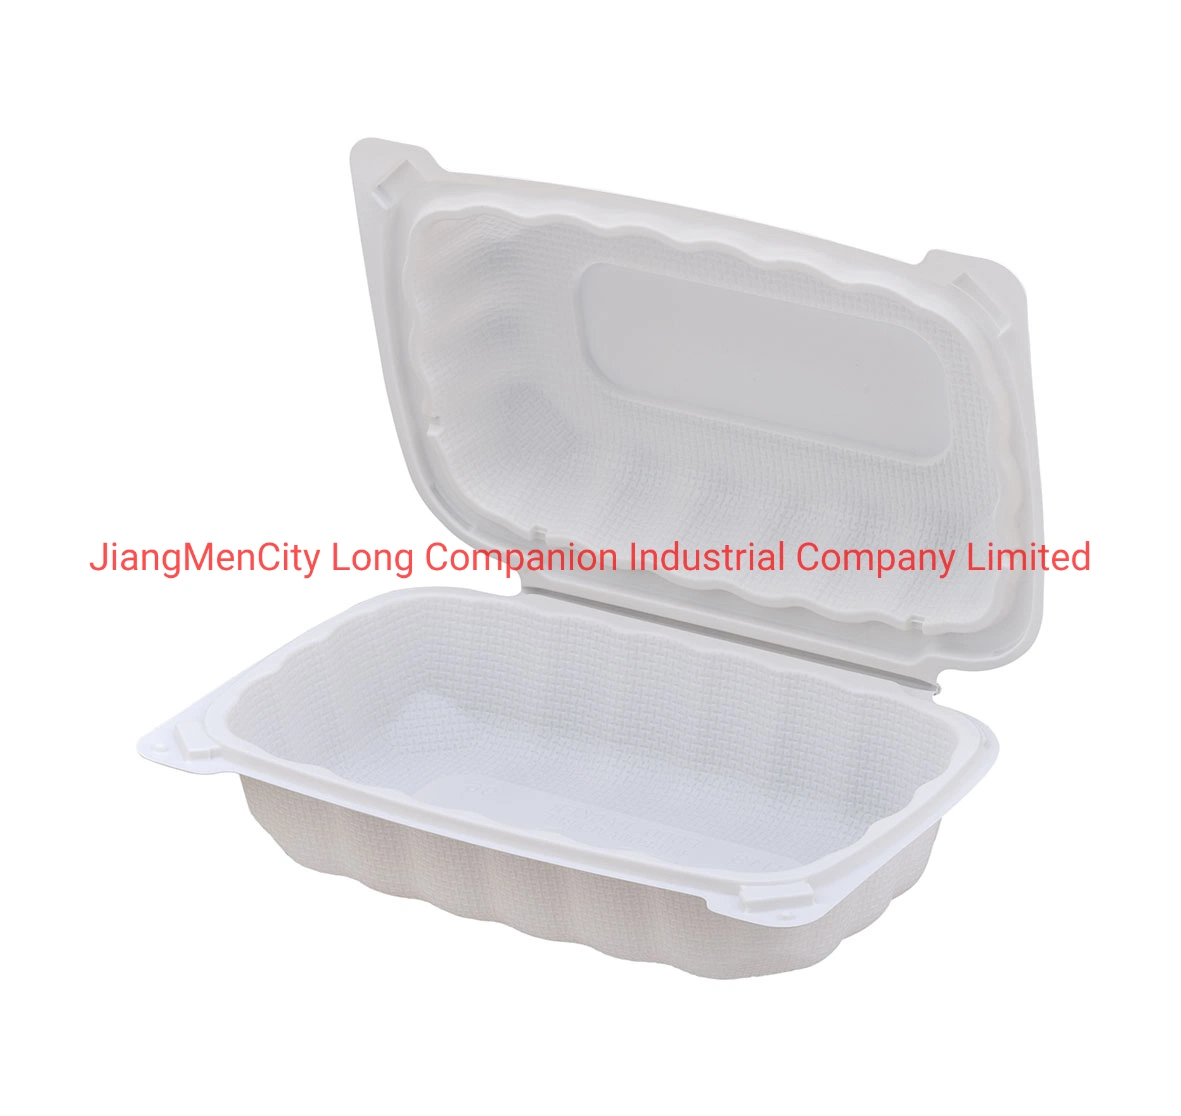 Go-to Degradable FDA Green Food Container Lunch Box